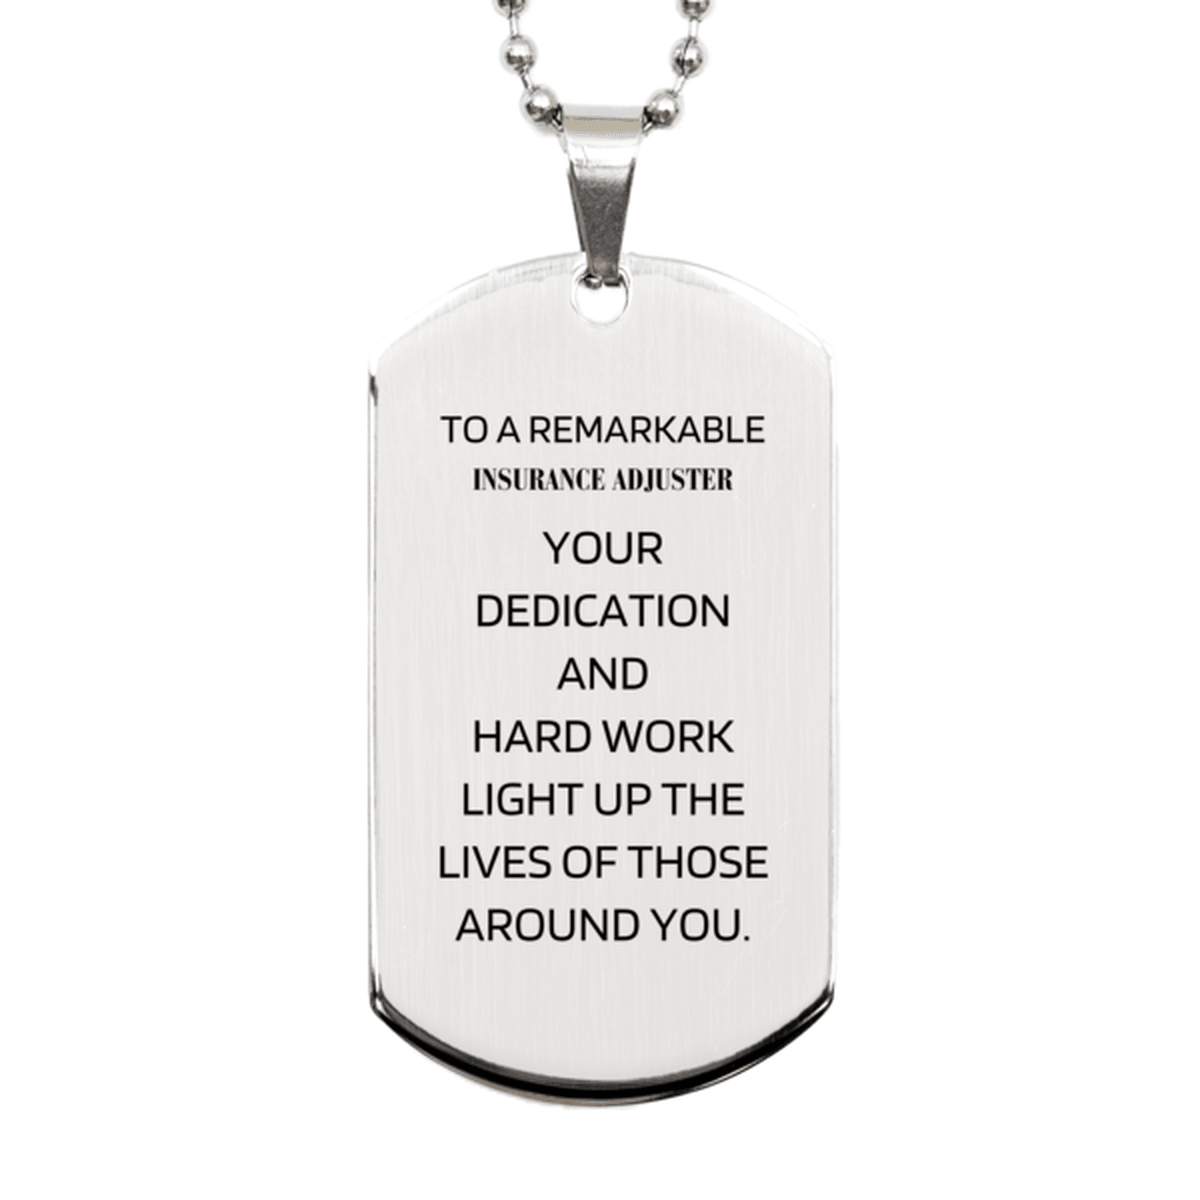 Remarkable Insurance Adjuster Gifts, Your dedication and hard work, Inspirational Birthday Christmas Unique Silver Dog Tag For Insurance Adjuster, Coworkers, Men, Women, Friends - Mallard Moon Gift Shop